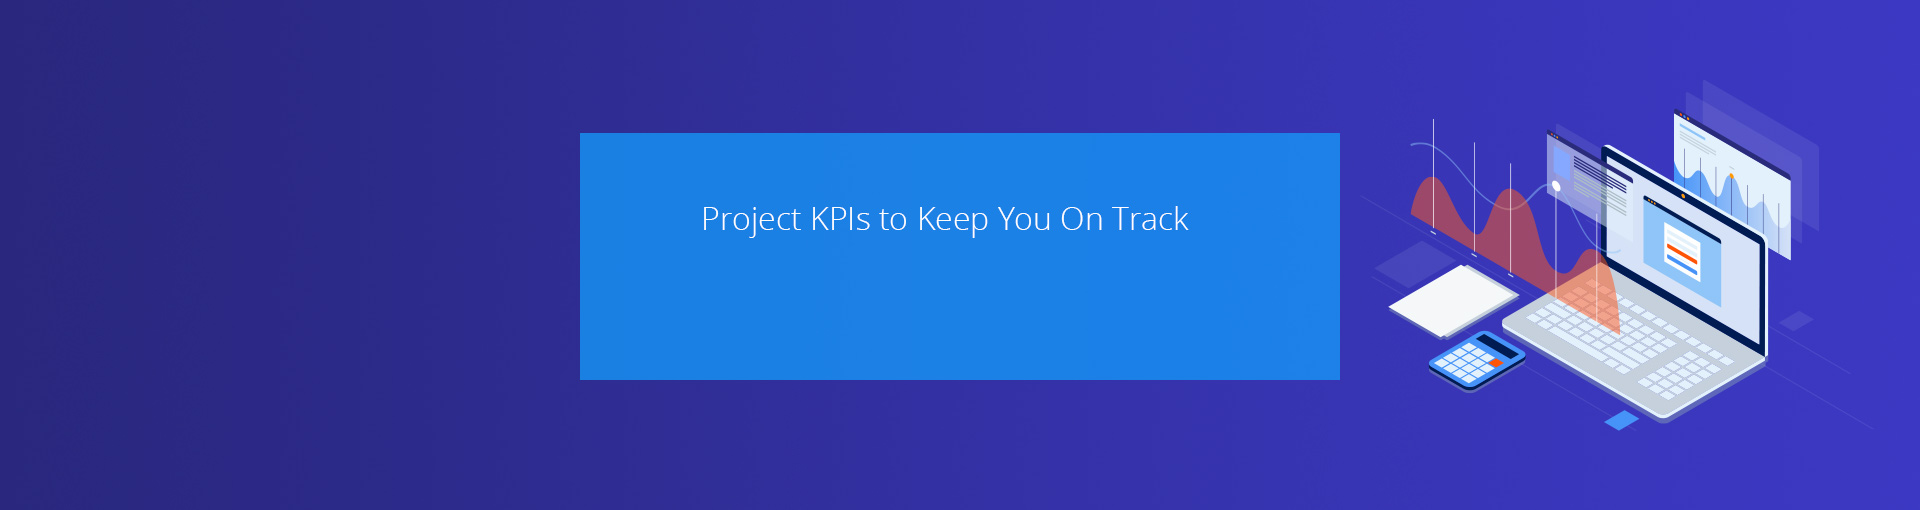 Project KPIs to Keep You On Track Featured Image